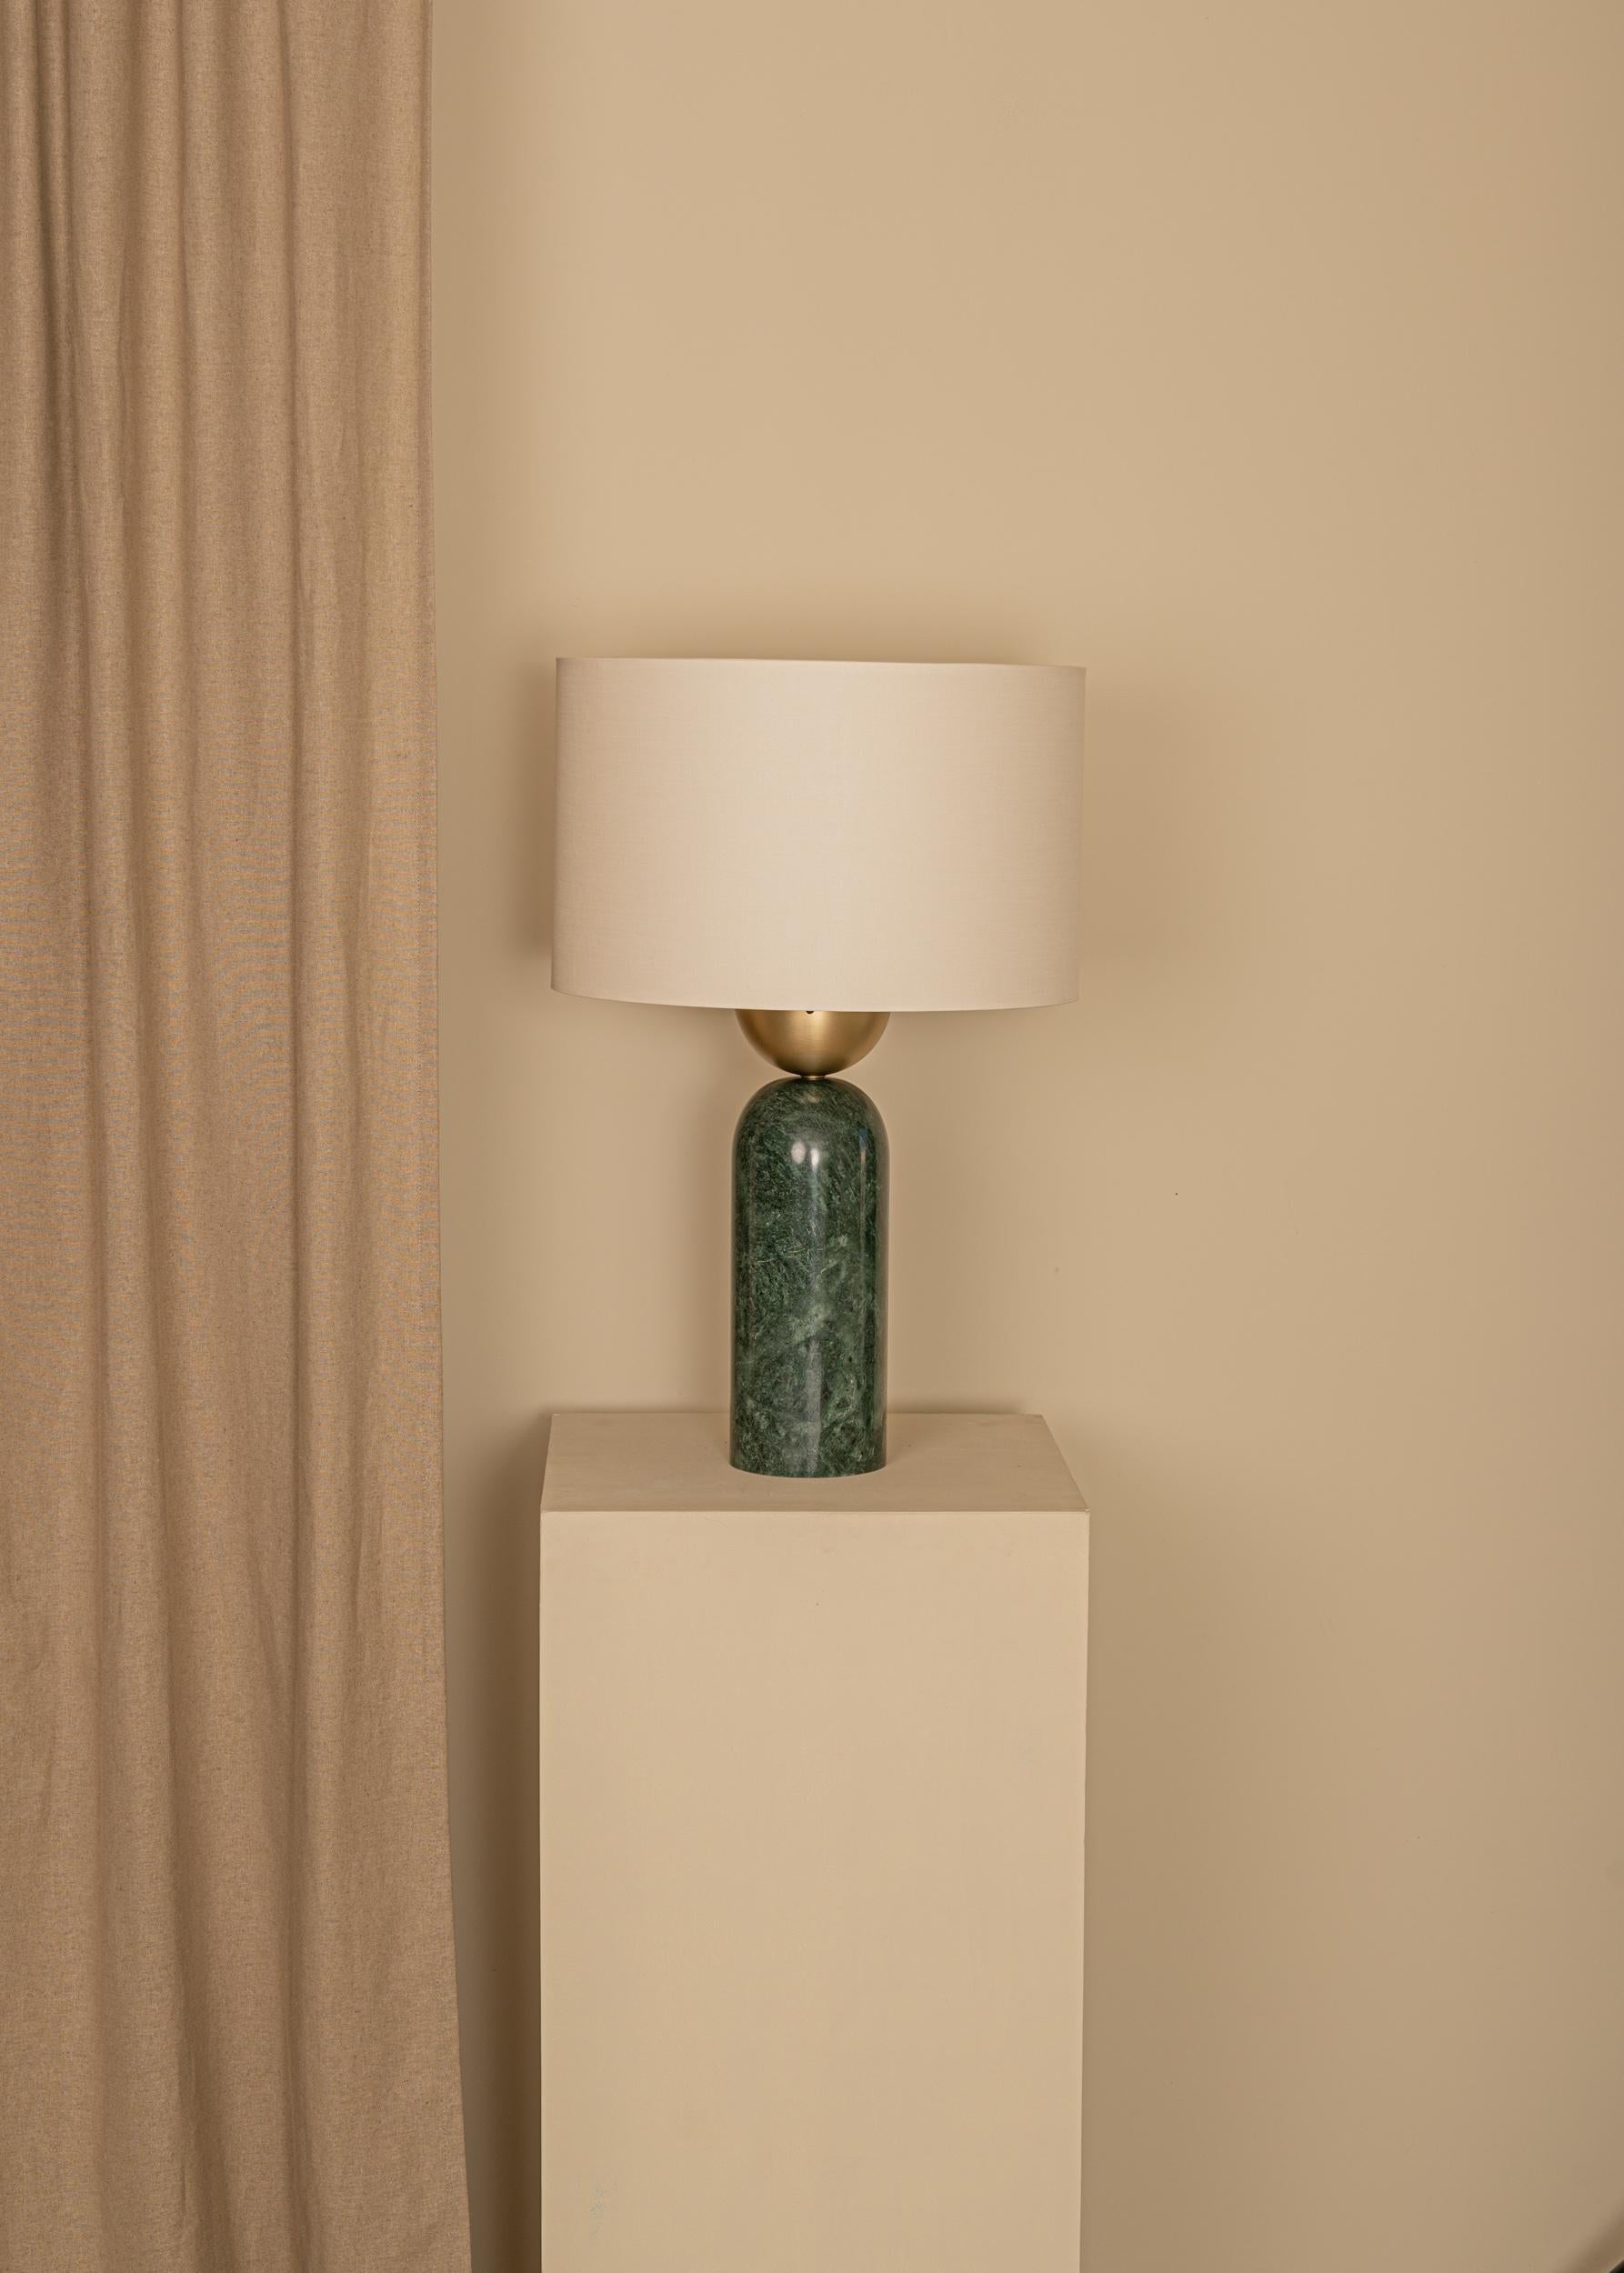 Green Marble Peona Table Lamp by Simone & Marcel
Dimensions: Ø 40 x H 61 cm.
Materials: Brass, cotton and green marble.

Also available in different marble, wood and alabaster options and finishes. Custom options available on request. Please contact